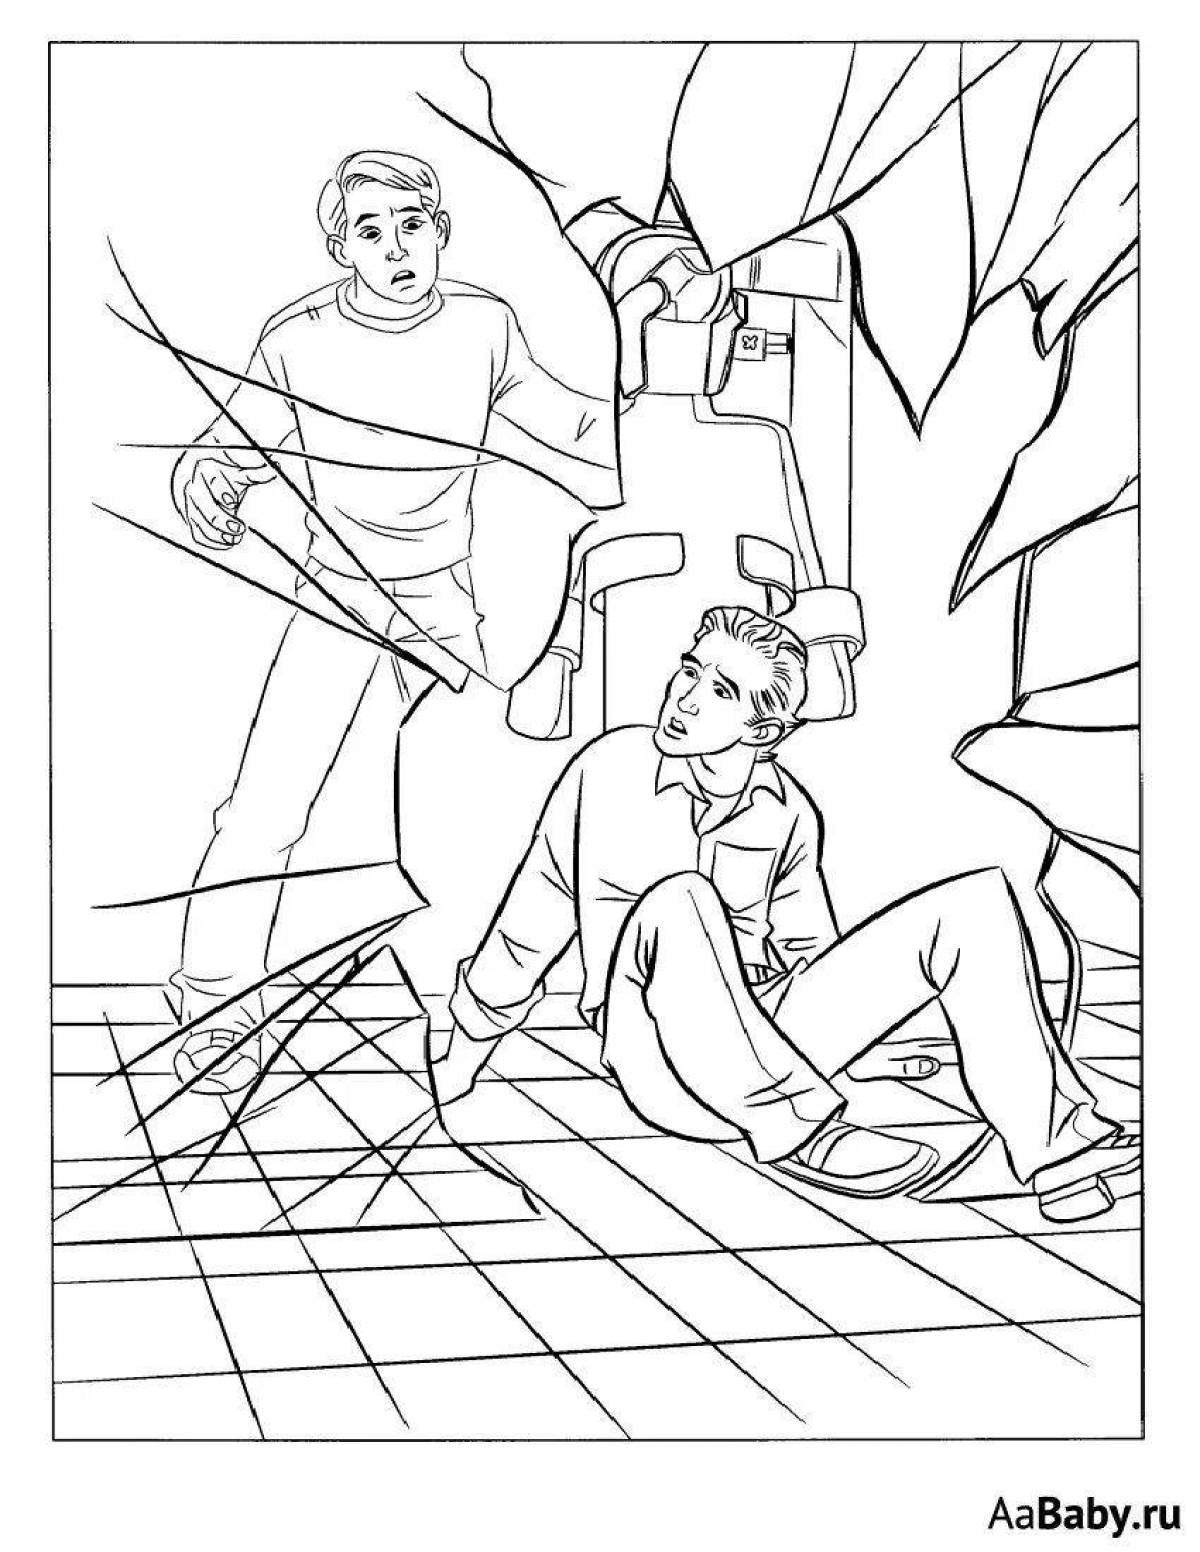 Peter parker's colorful coloring page